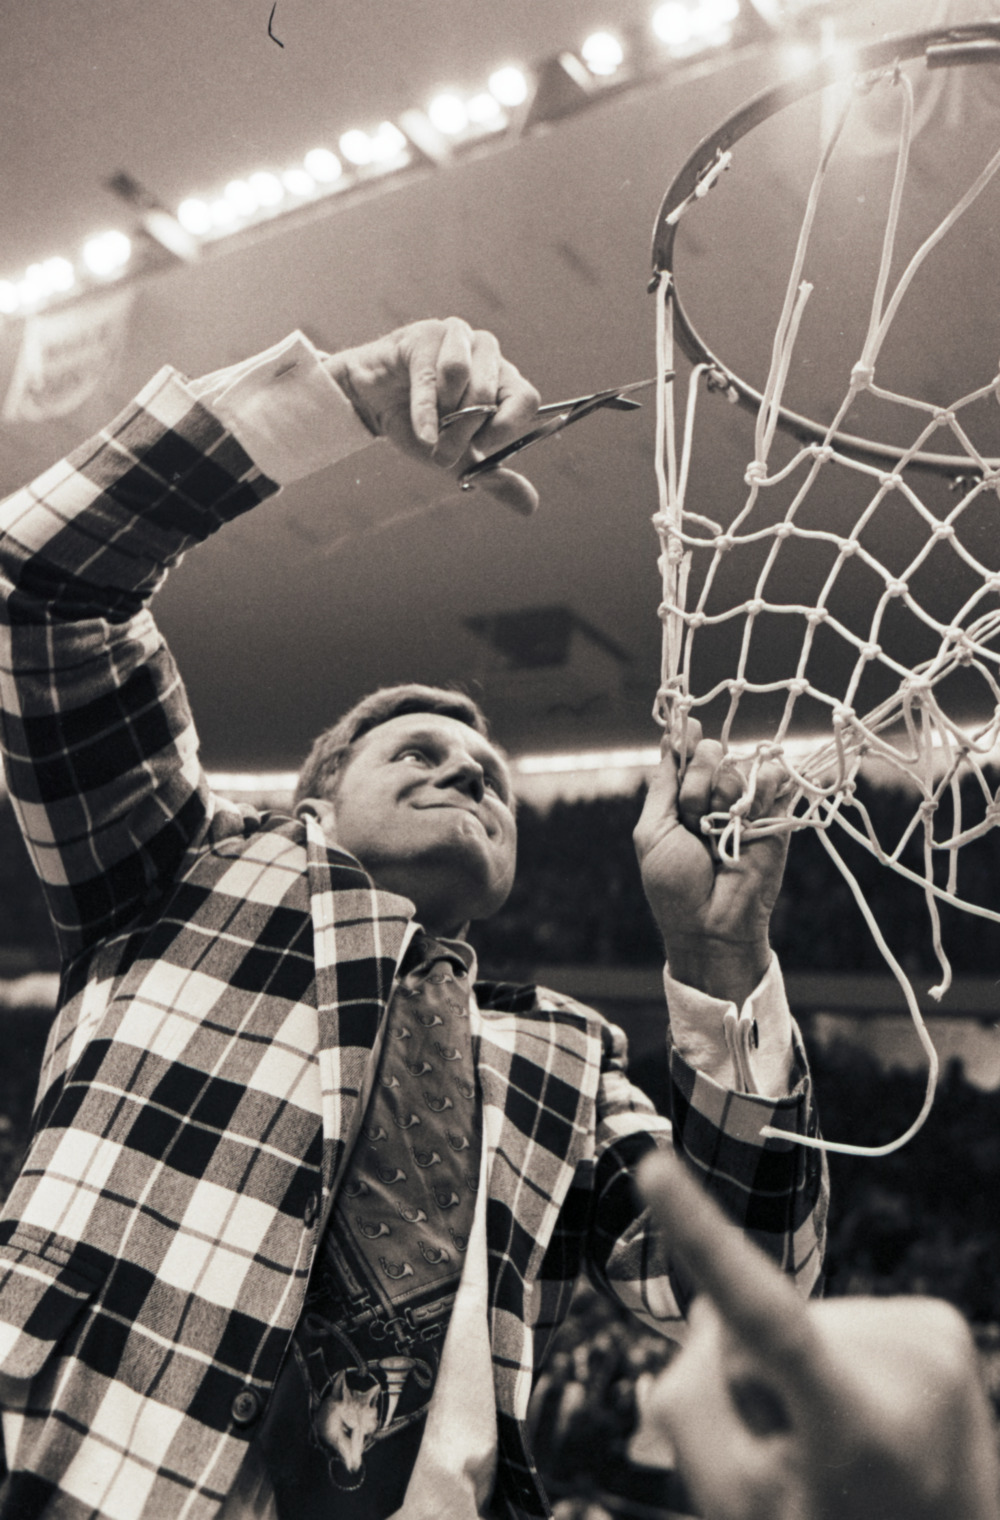 Cutting down net after NCAA championship win, March 25 1974